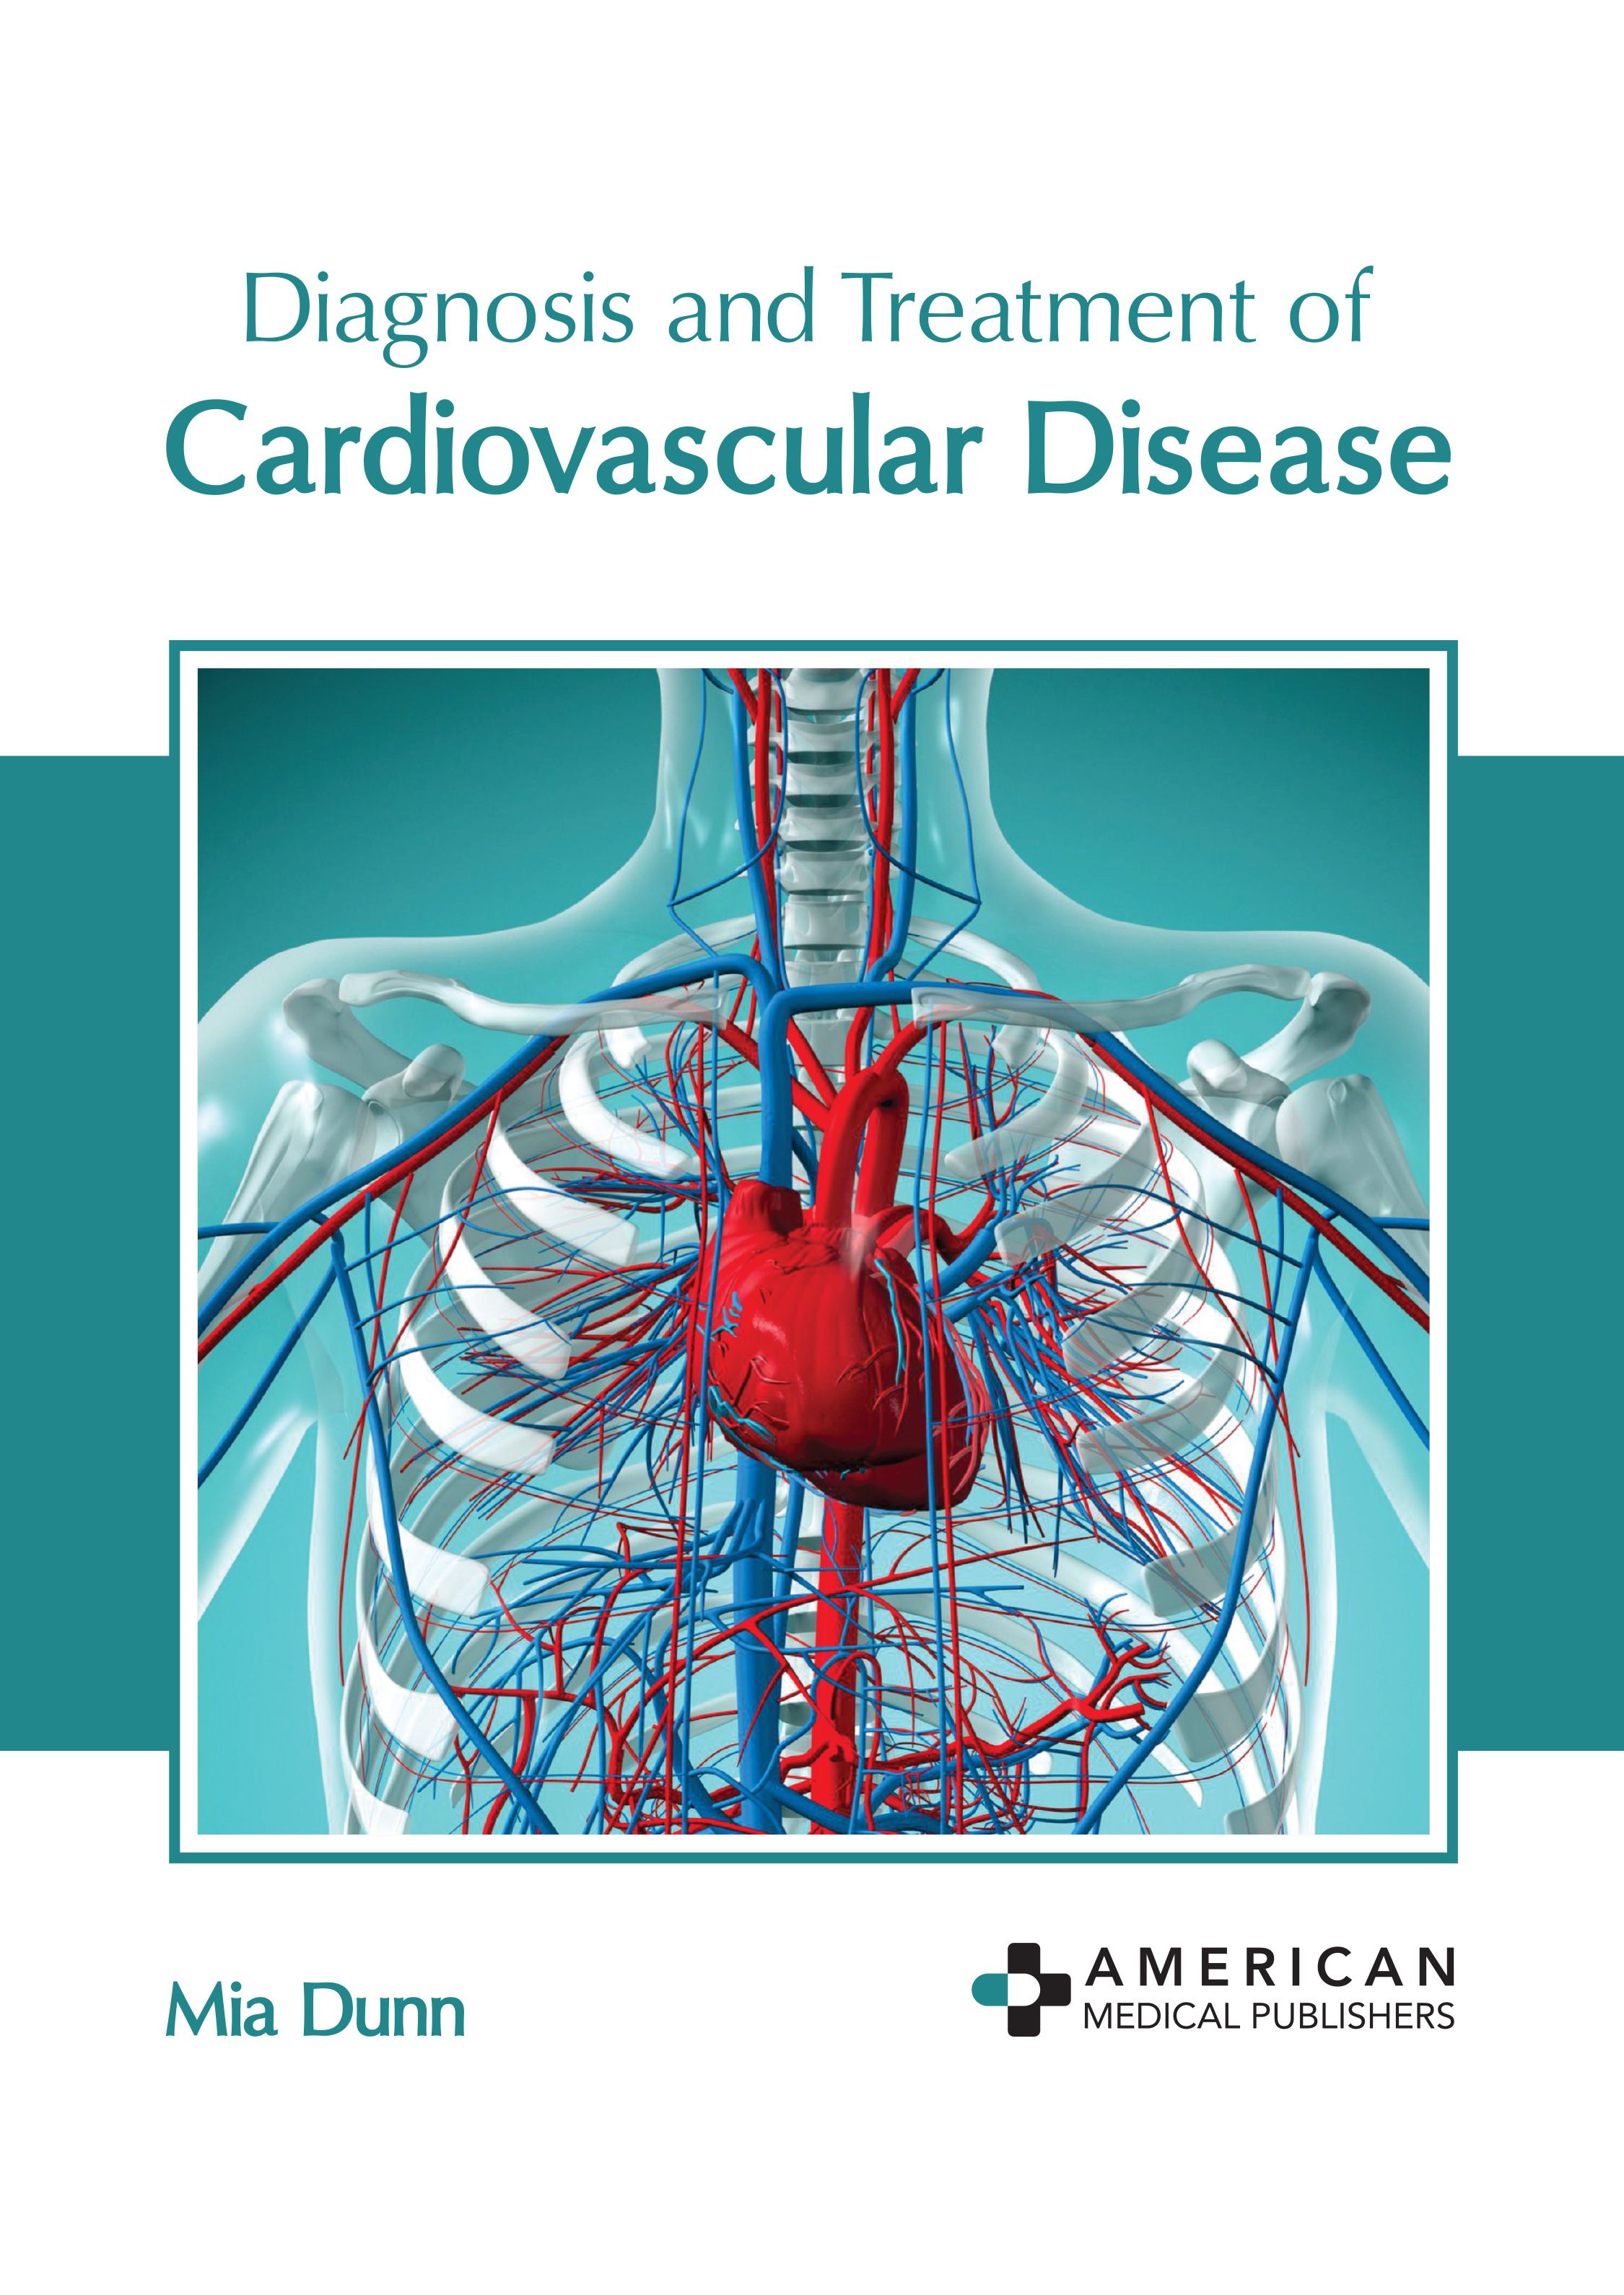 DIAGNOSIS AND TREATMENT OF CARDIOVASCULAR DISEASE